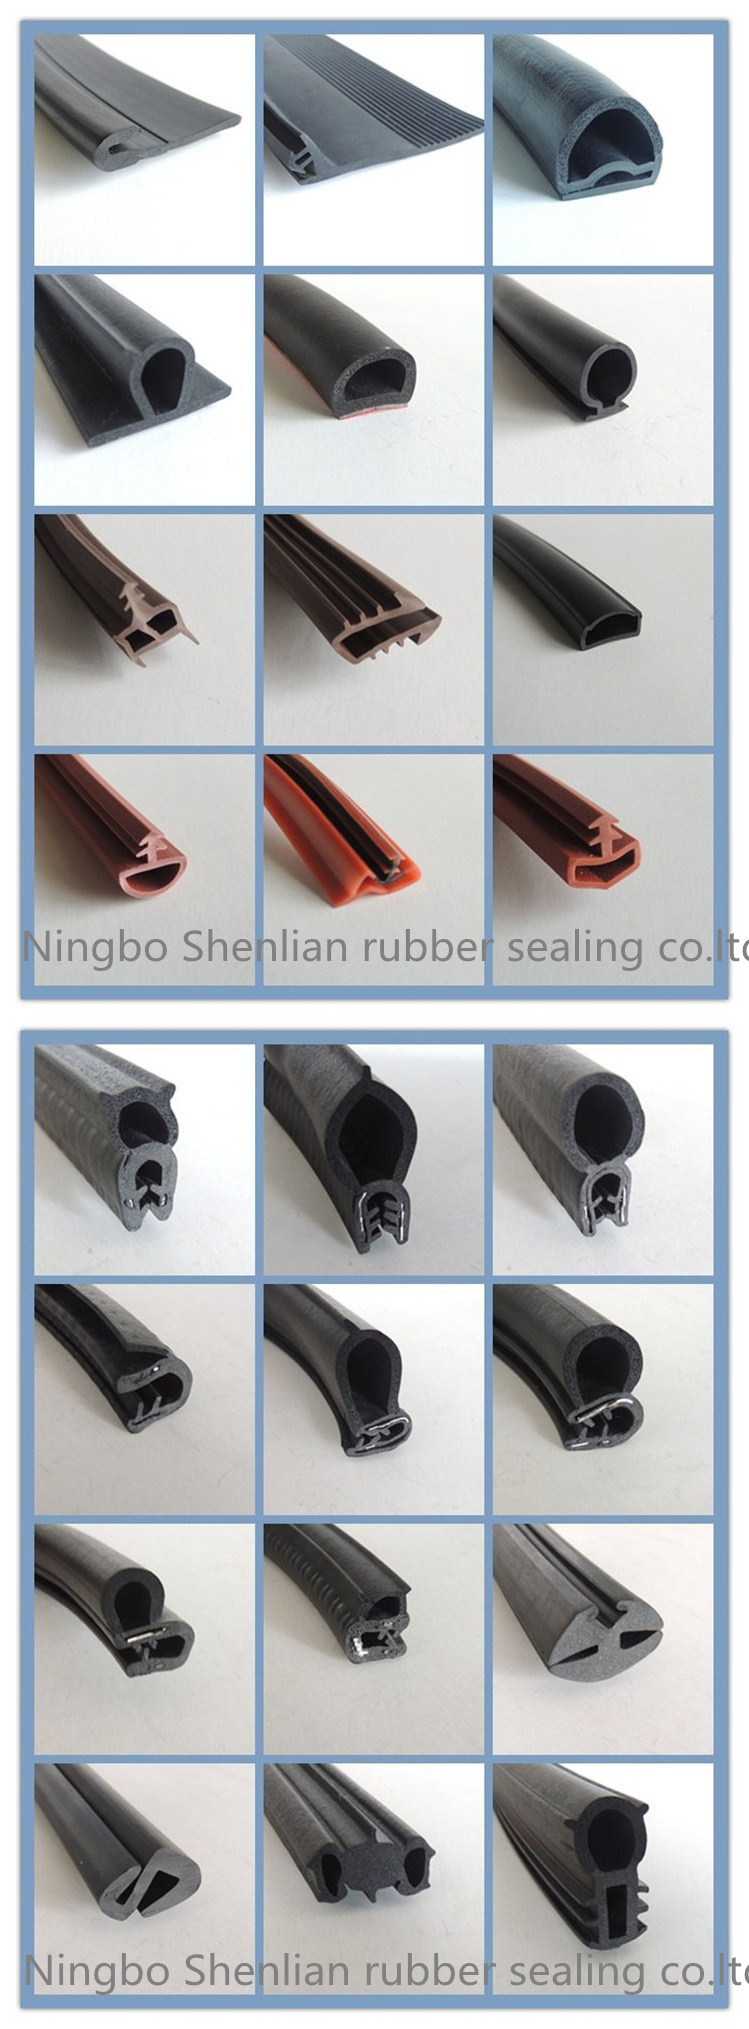 SGS Approval Factory Price Rubber Sealing Strip